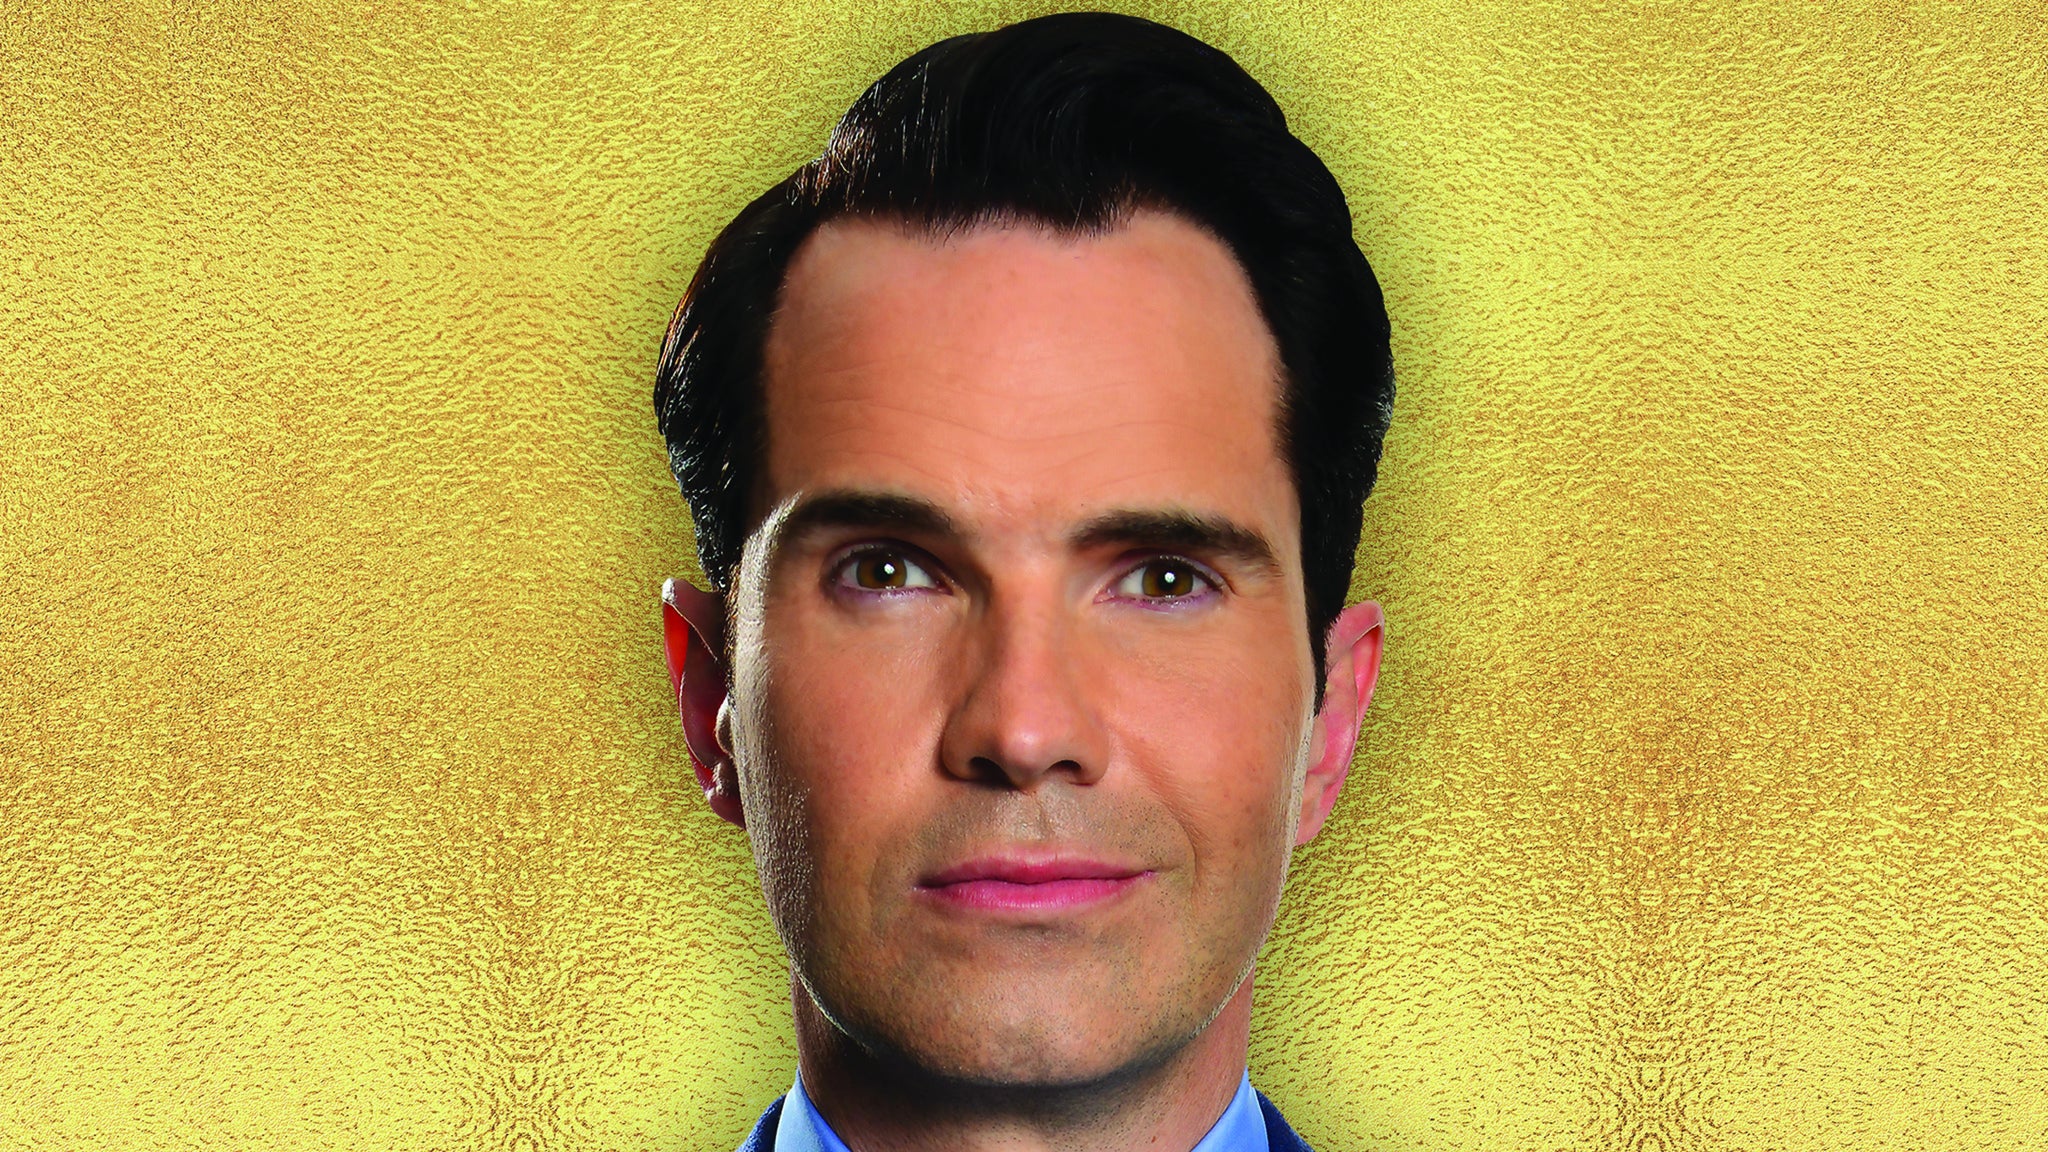 Netflix Is A Joke Presents: Jimmy Carr in Los Angeles promo photo for Live Nation presale offer code